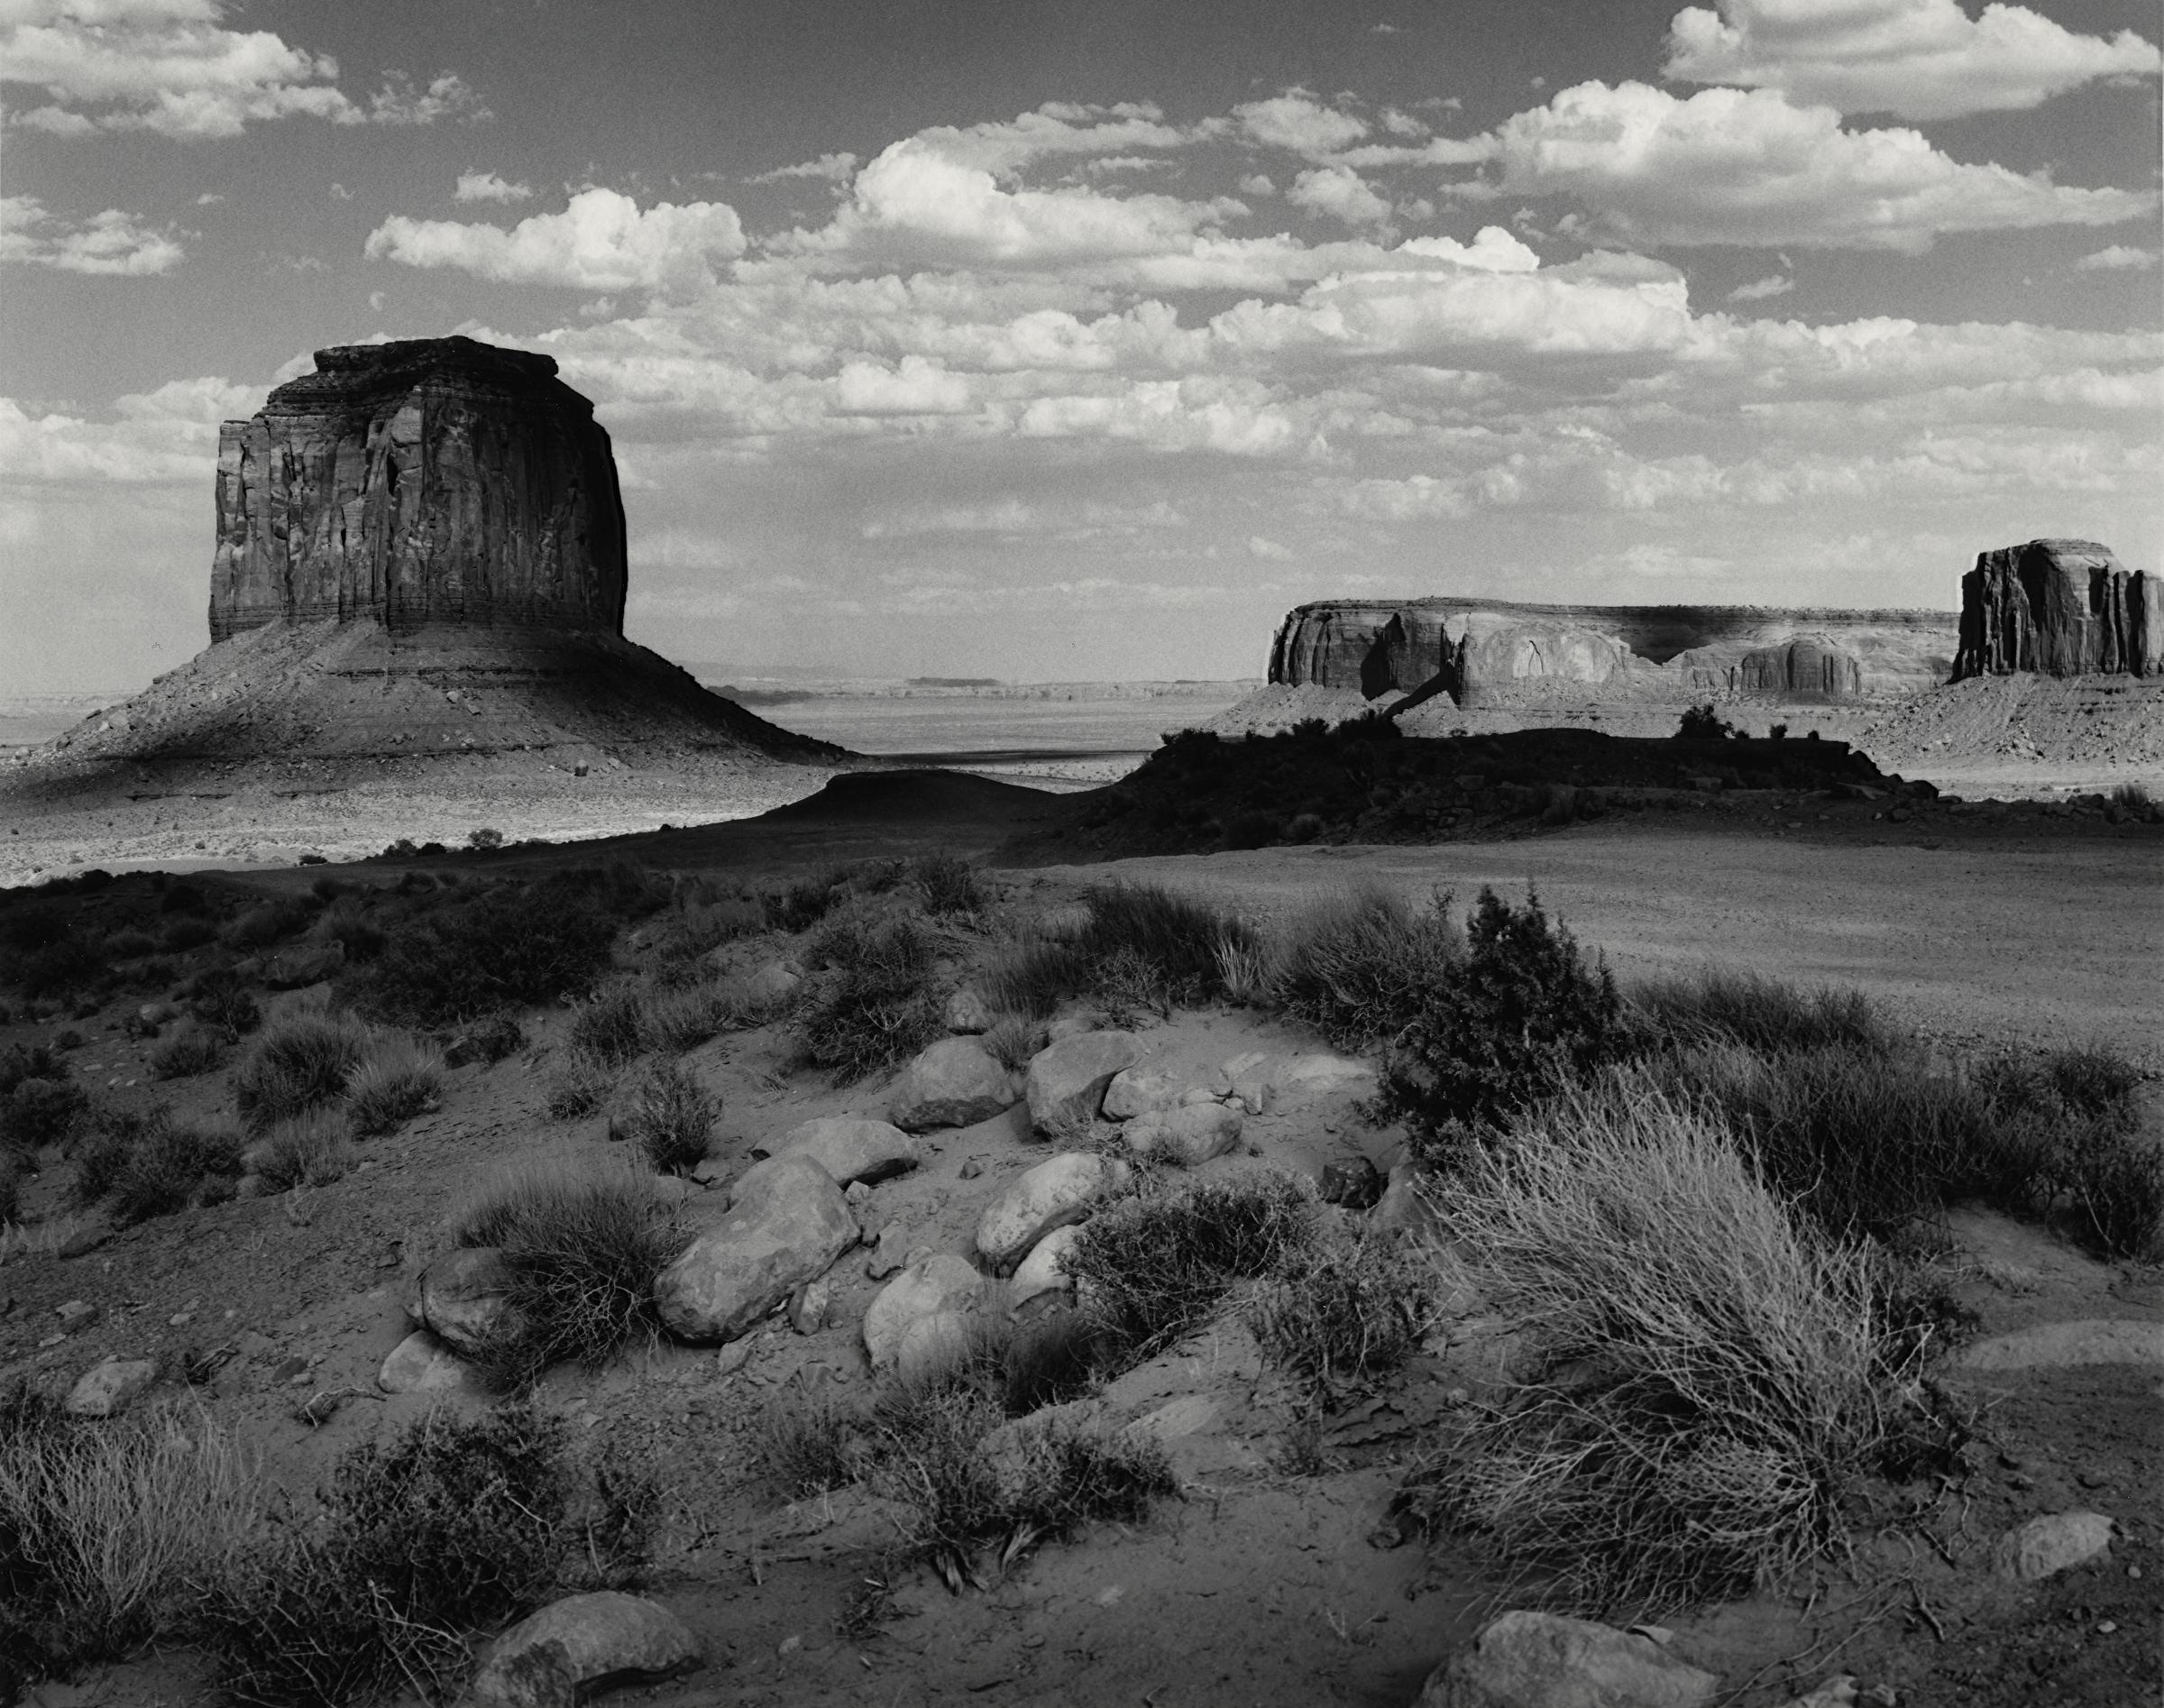 Kurt Markus, Monument Valley, 2011, Image Size: 19.75 x 25". Matted: 28 x 36", archival pigment ink print, edition of 25. Signed and editioned on print recto. Large scale landscape photograph of Monument Valley. Exhibited in Obscura Gallery solo